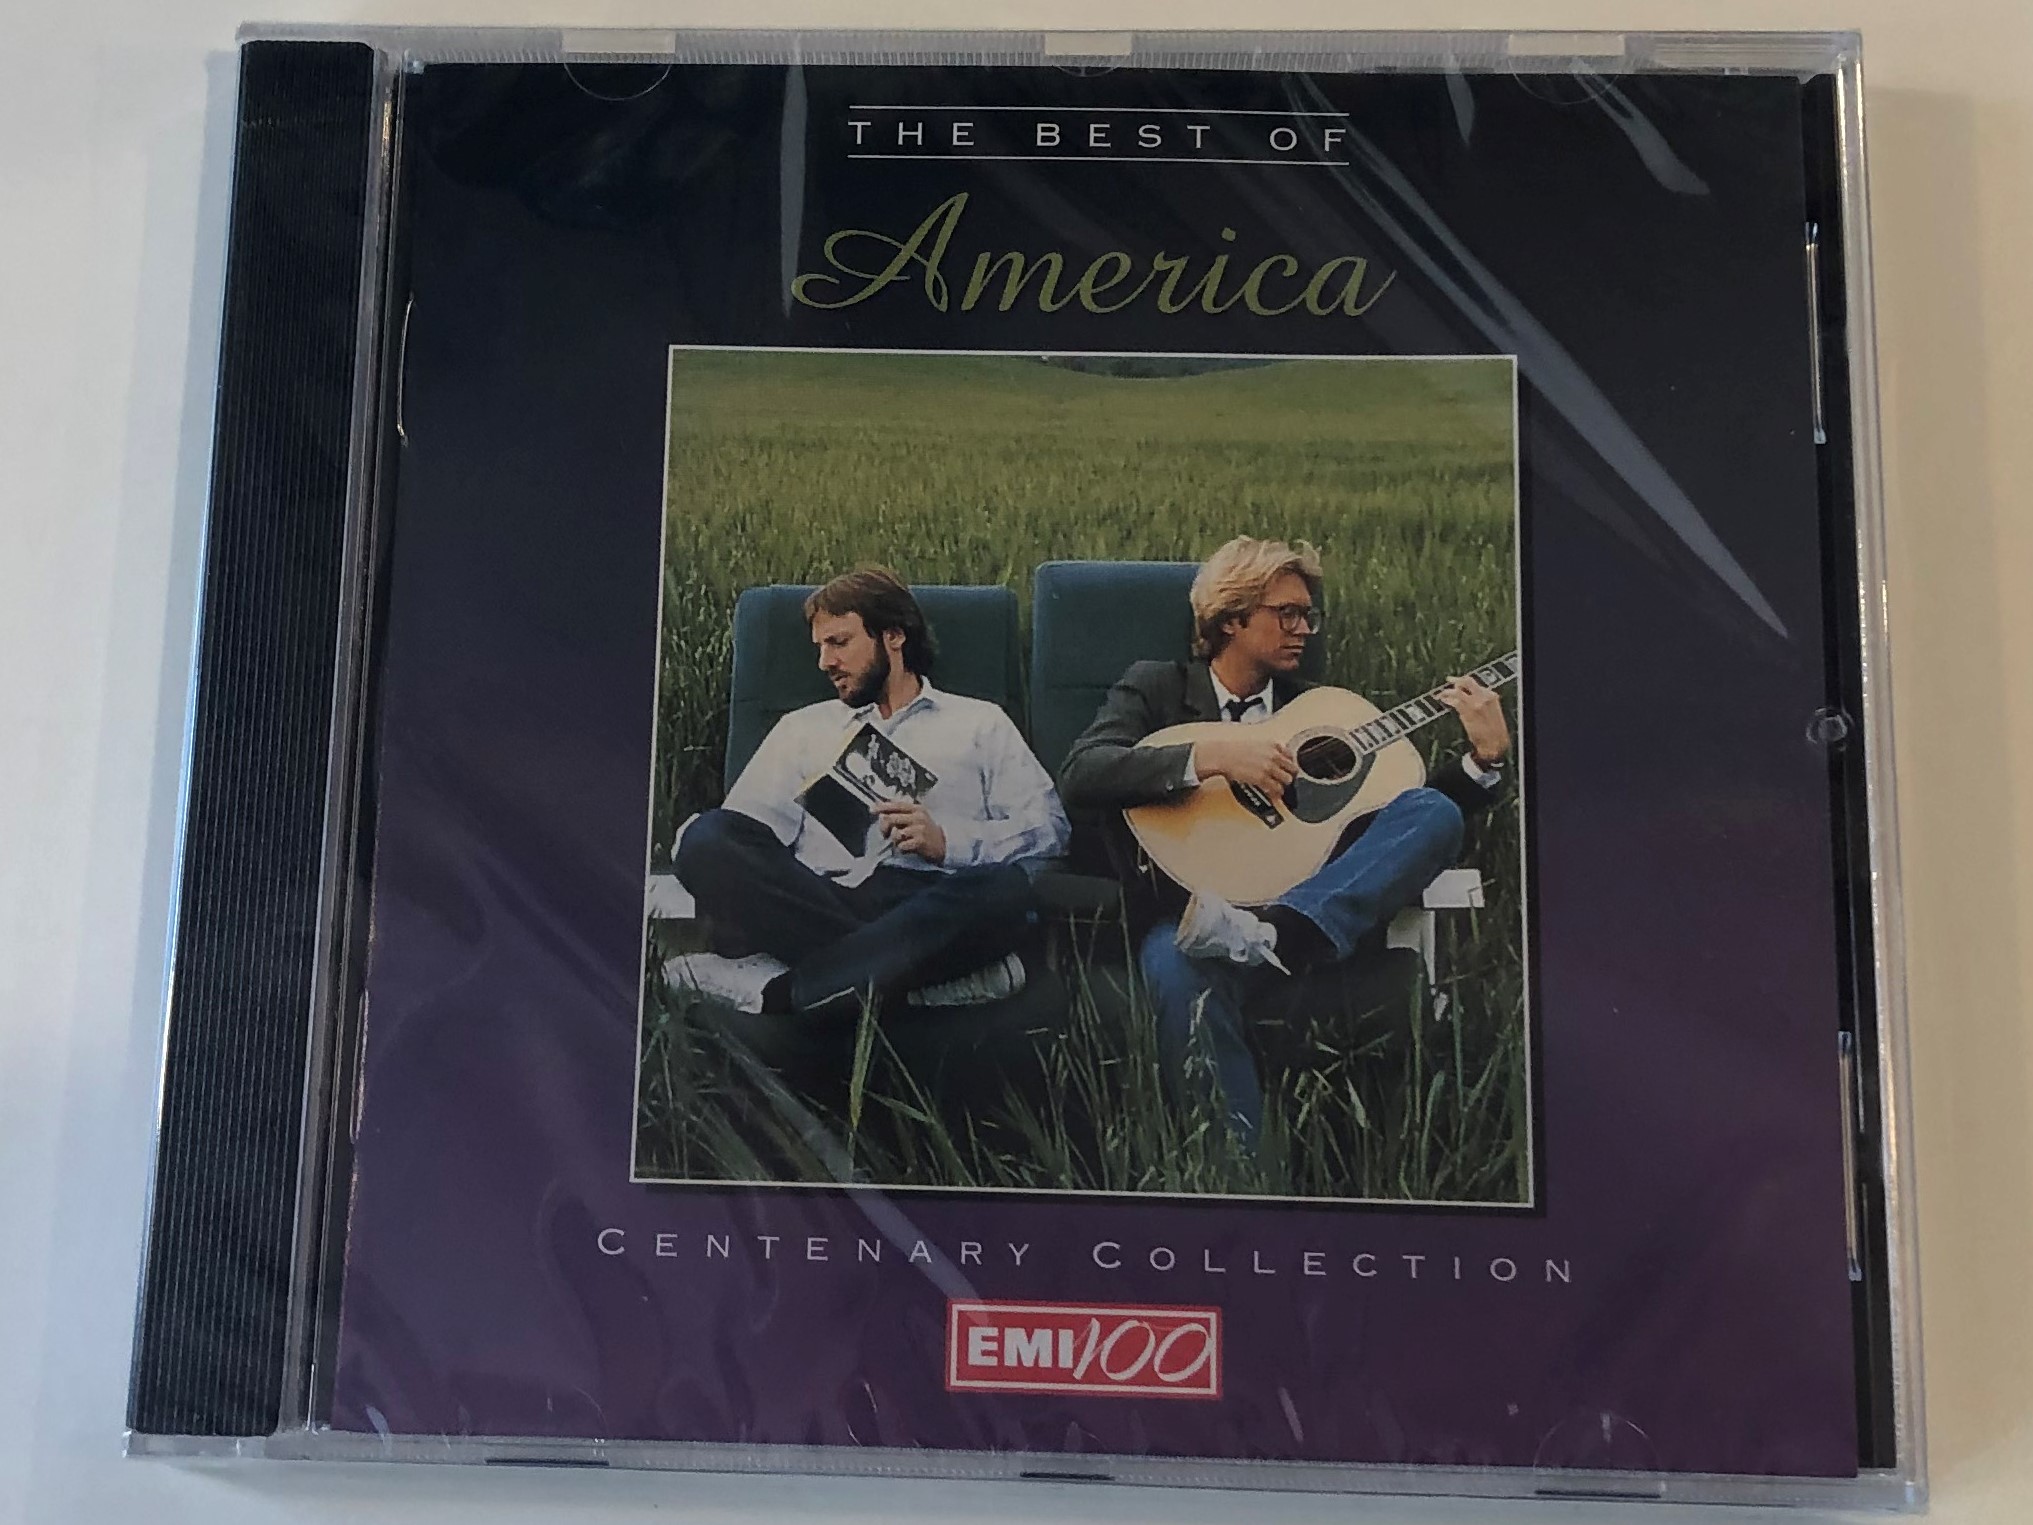 the-best-of-america-centenary-collection-emi-audio-cd-1997-724385502521-1-.jpg